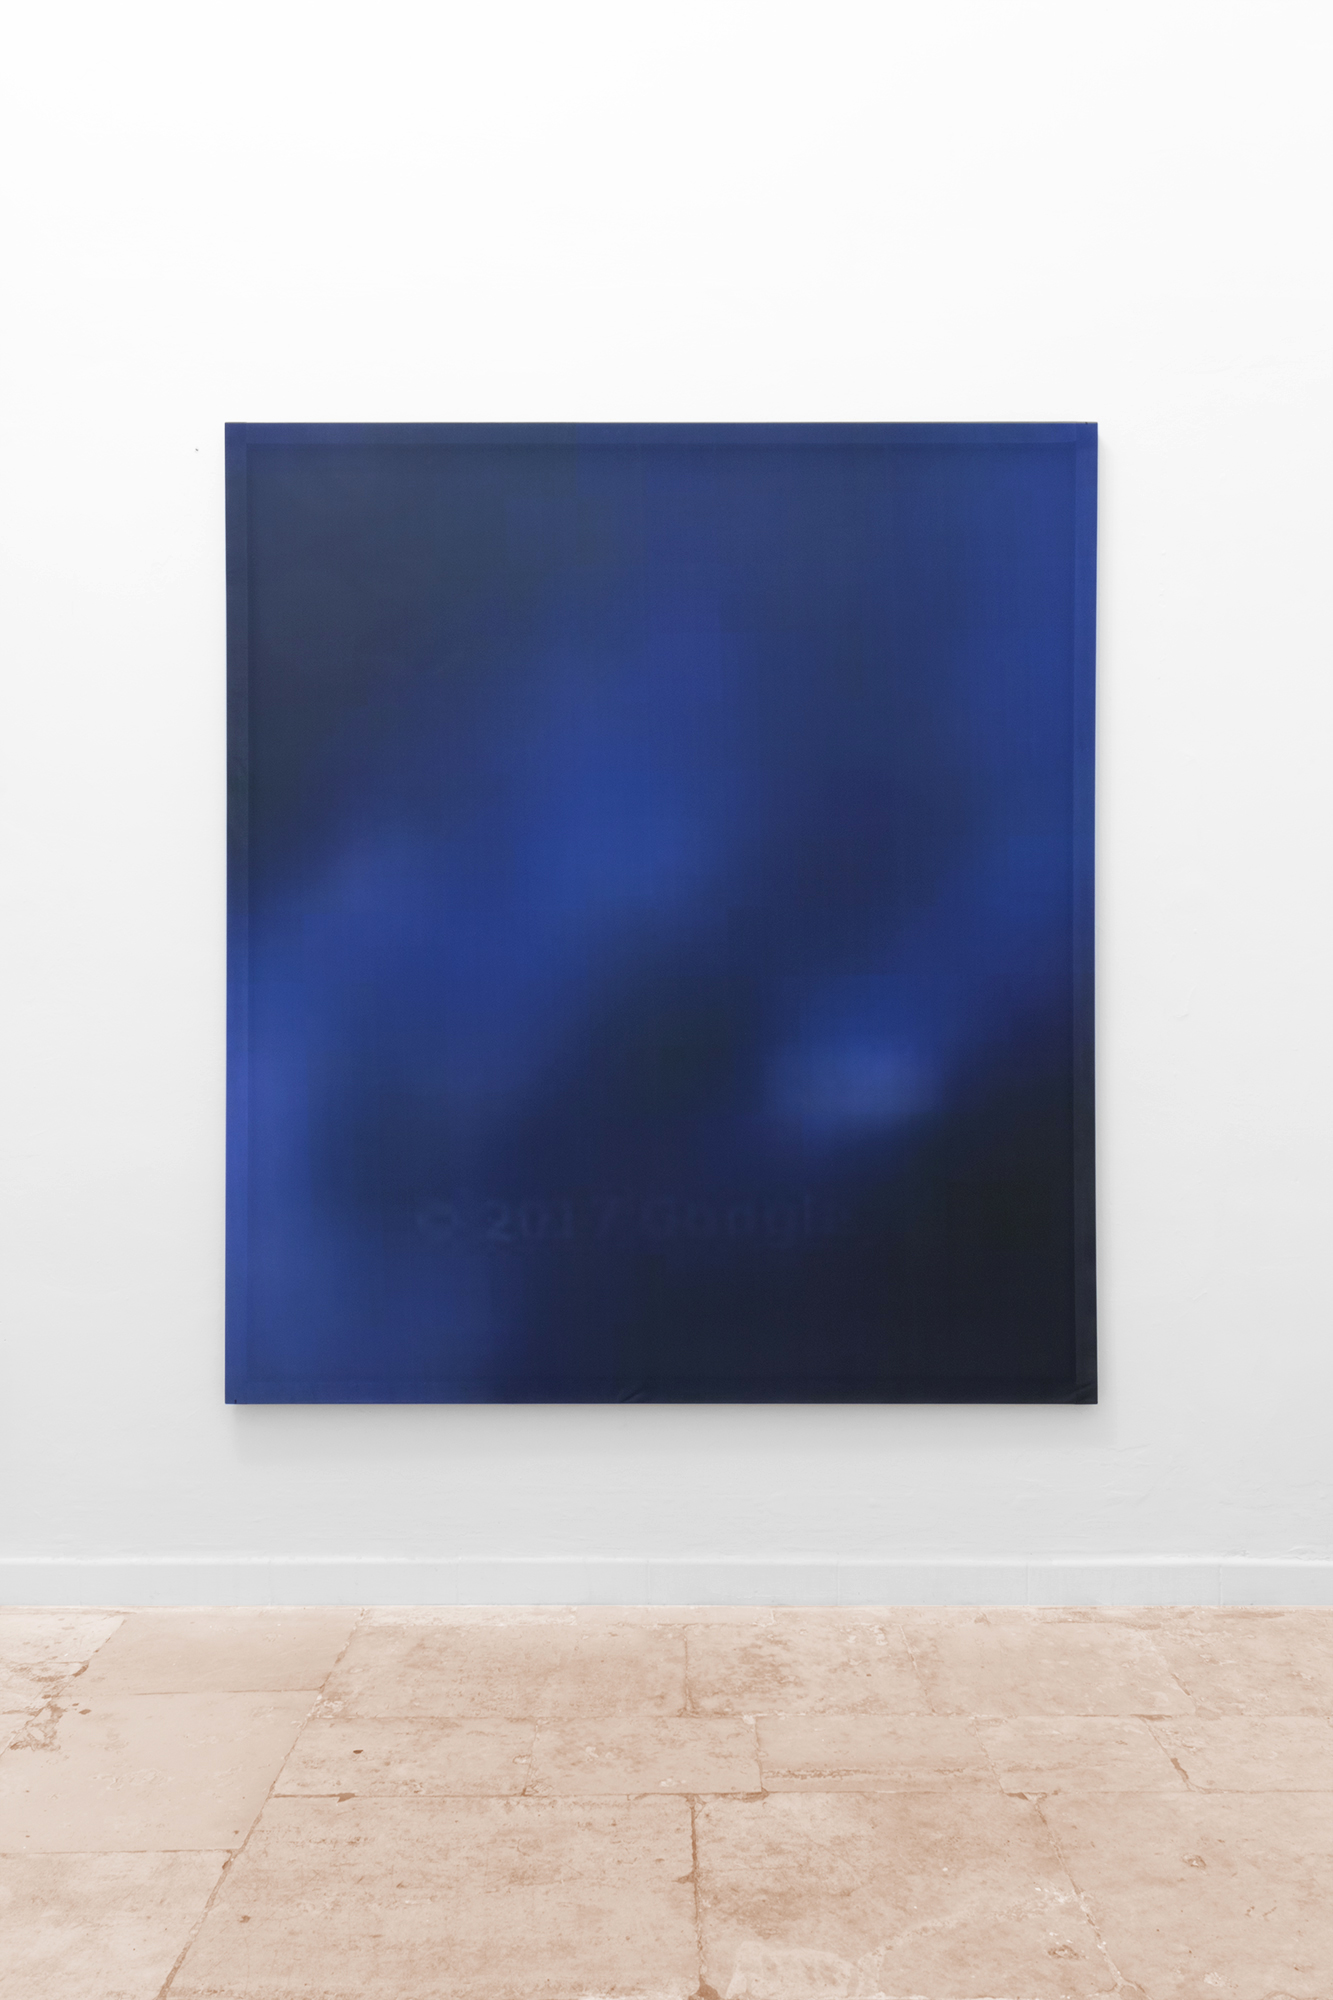 Maurizio Viceré, kh-(33) Black and blue, Calendered sublimation ink print on windproof nautical fabric, stretcher. 170 X 120 cm. 2018